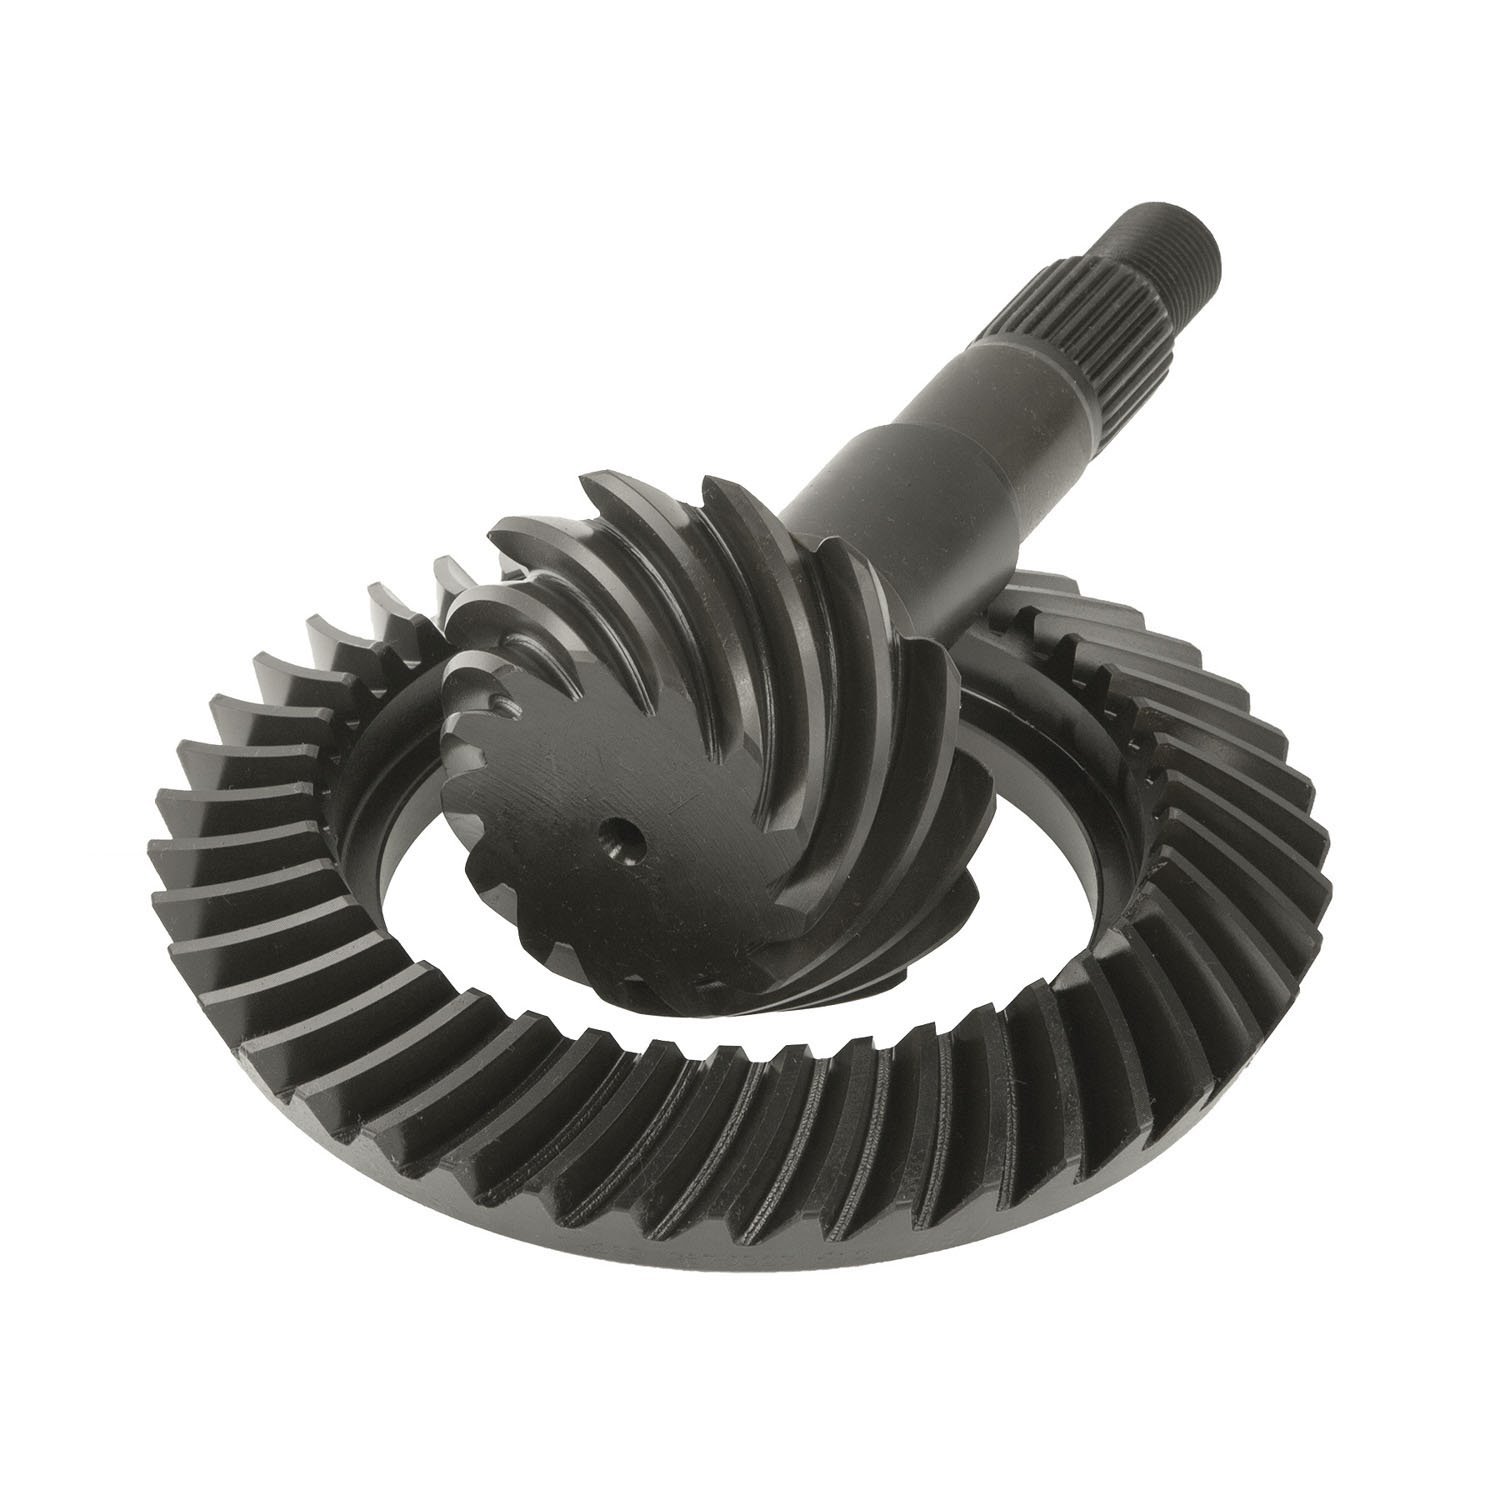 3.23 Ratio Differential Ring and Pinion Gear Set for GM 7.5 in. 7.625 in. (10 Bolt), 7.6 in. IFS 3.23 or Higher Differentials